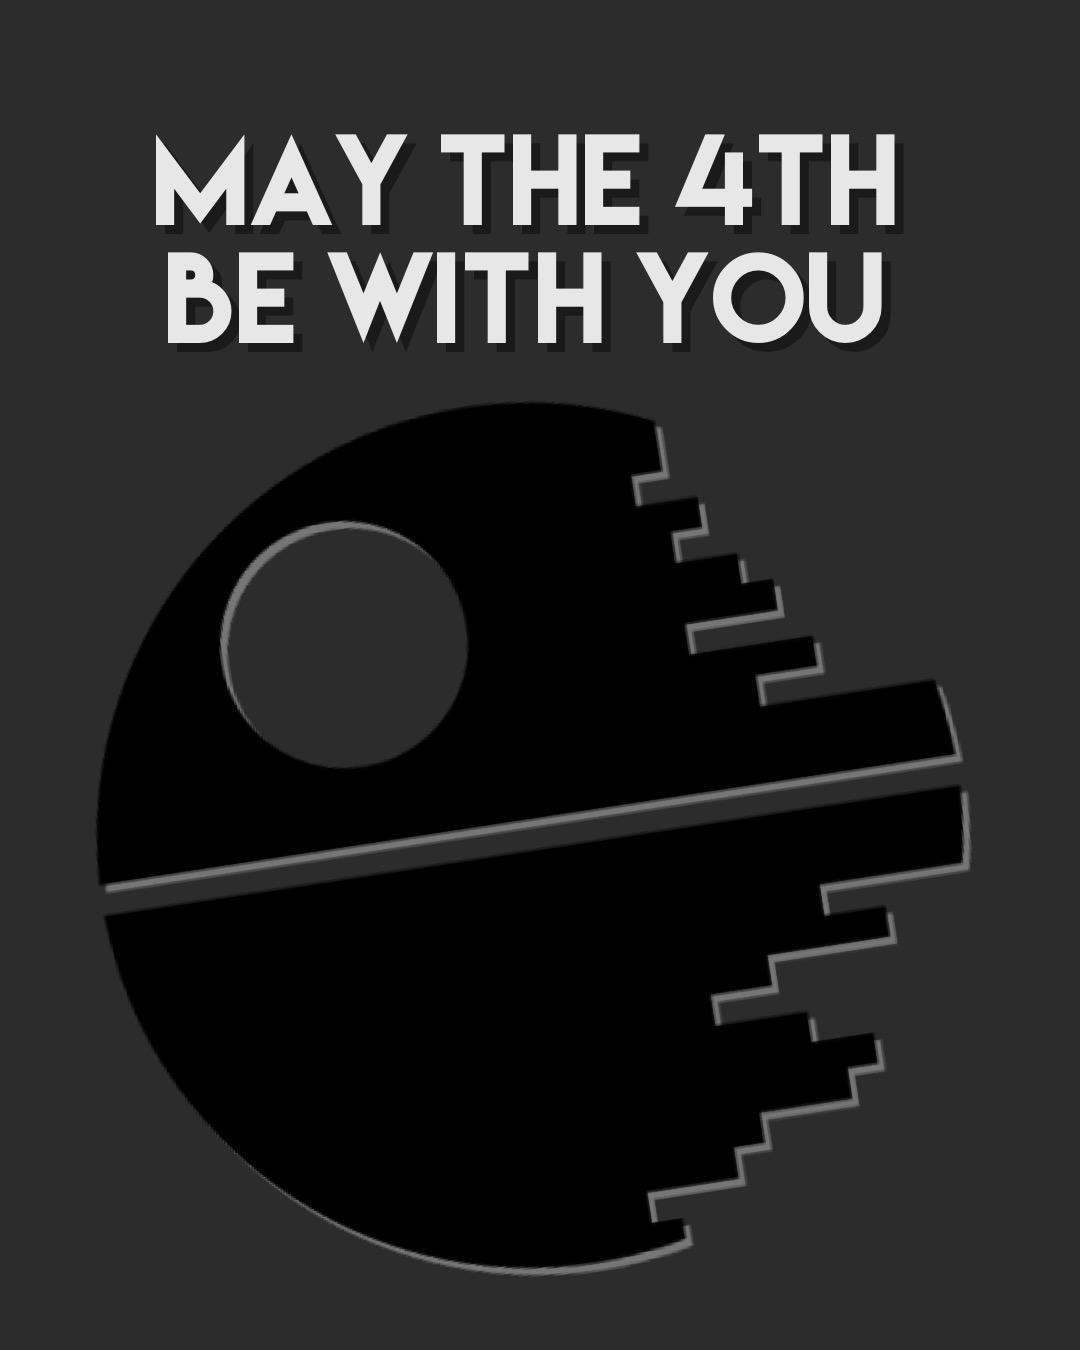 May the 4th Be With You.